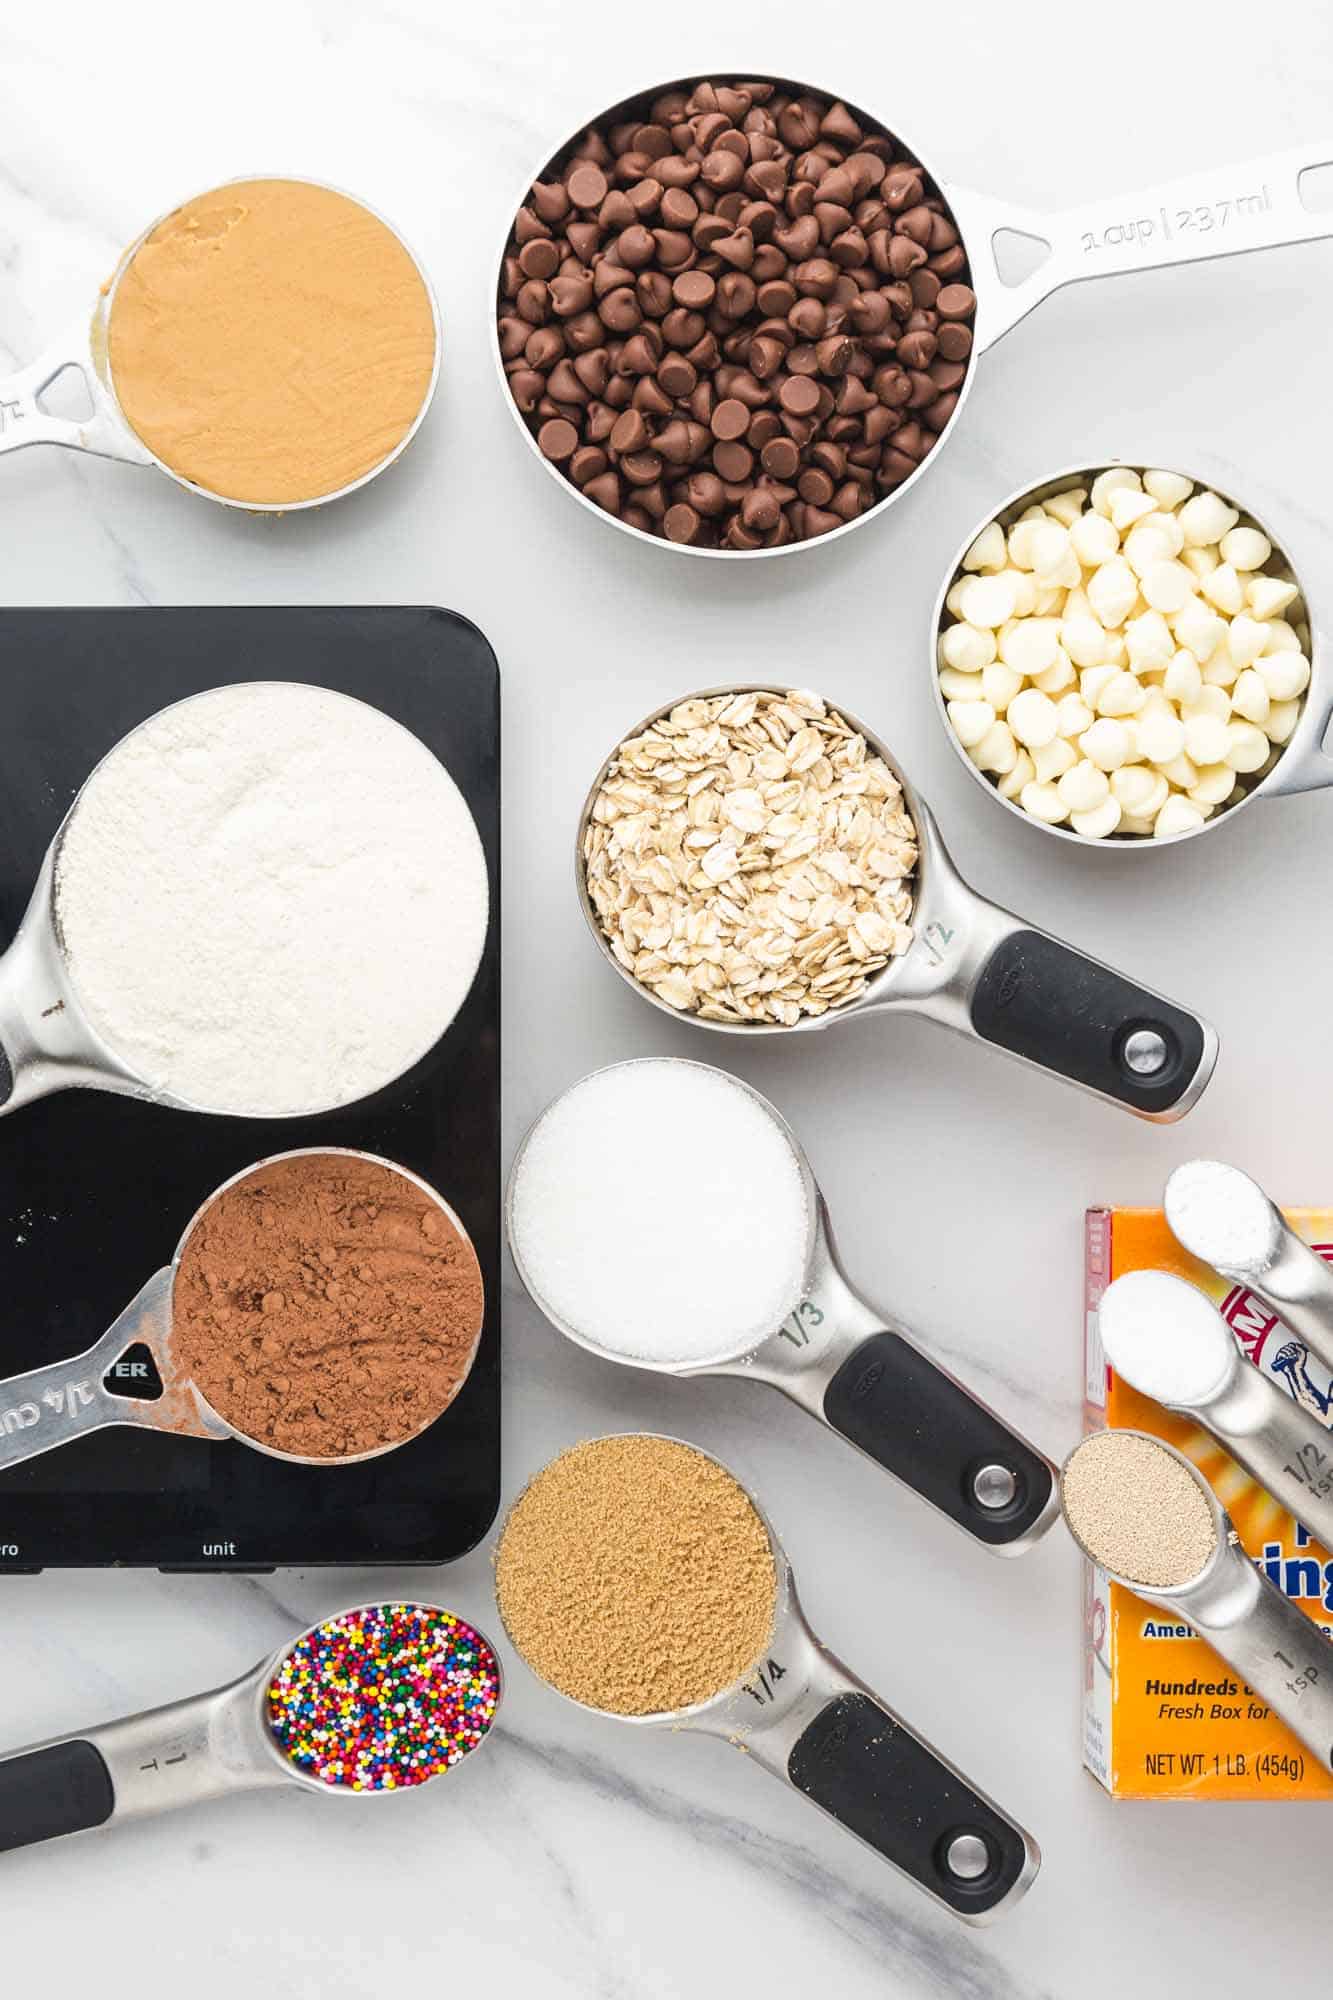 Overhead shot showing measured out baking ingredients such as flour, sugars, chocolate chips, oats.